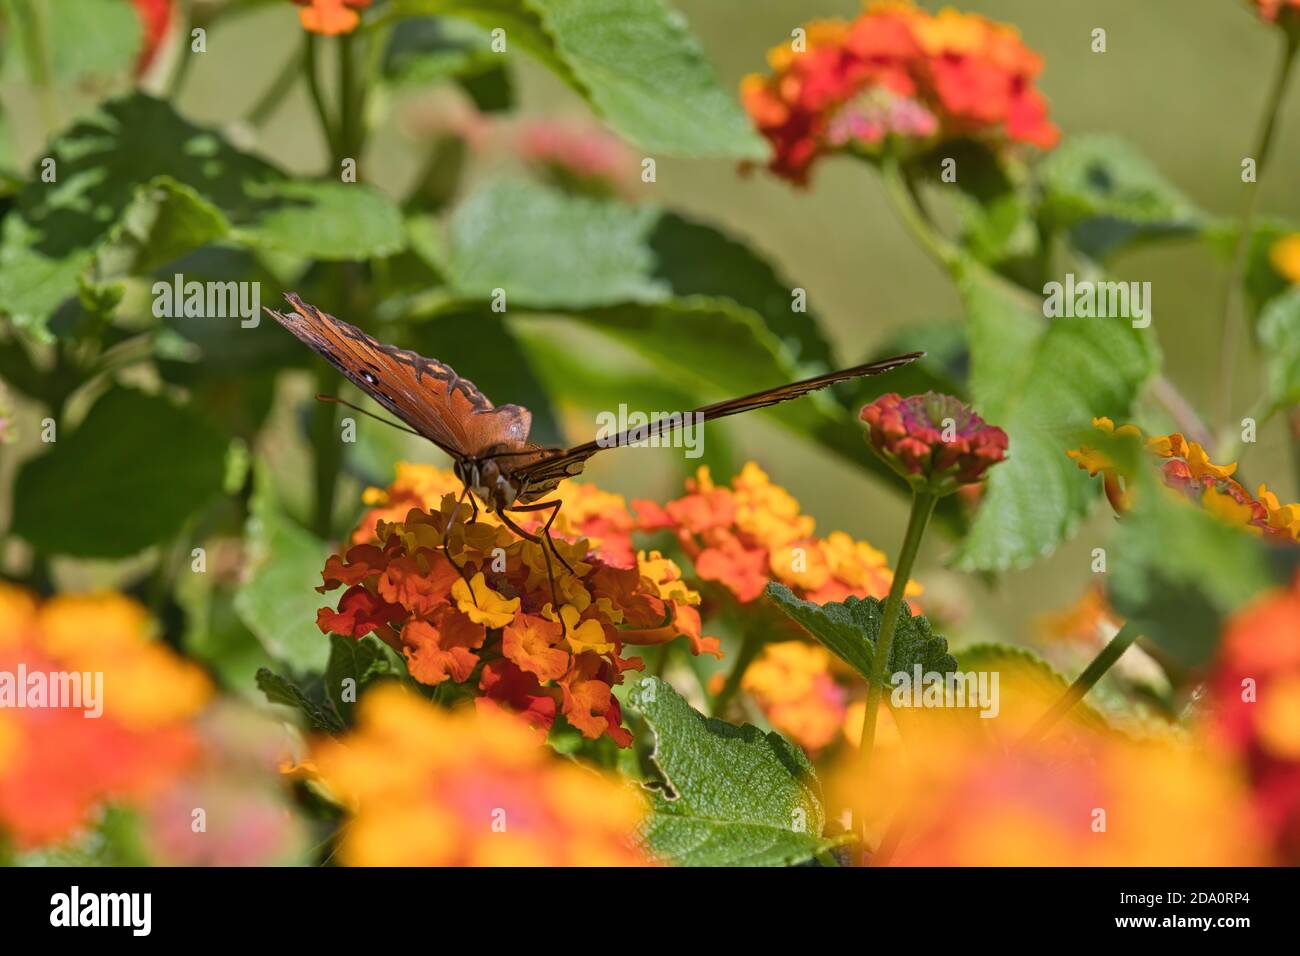 Voyeuristic view of a brightly colored gulf fritellary butterfly feeding on orange and yellow flowers. Stock Photo